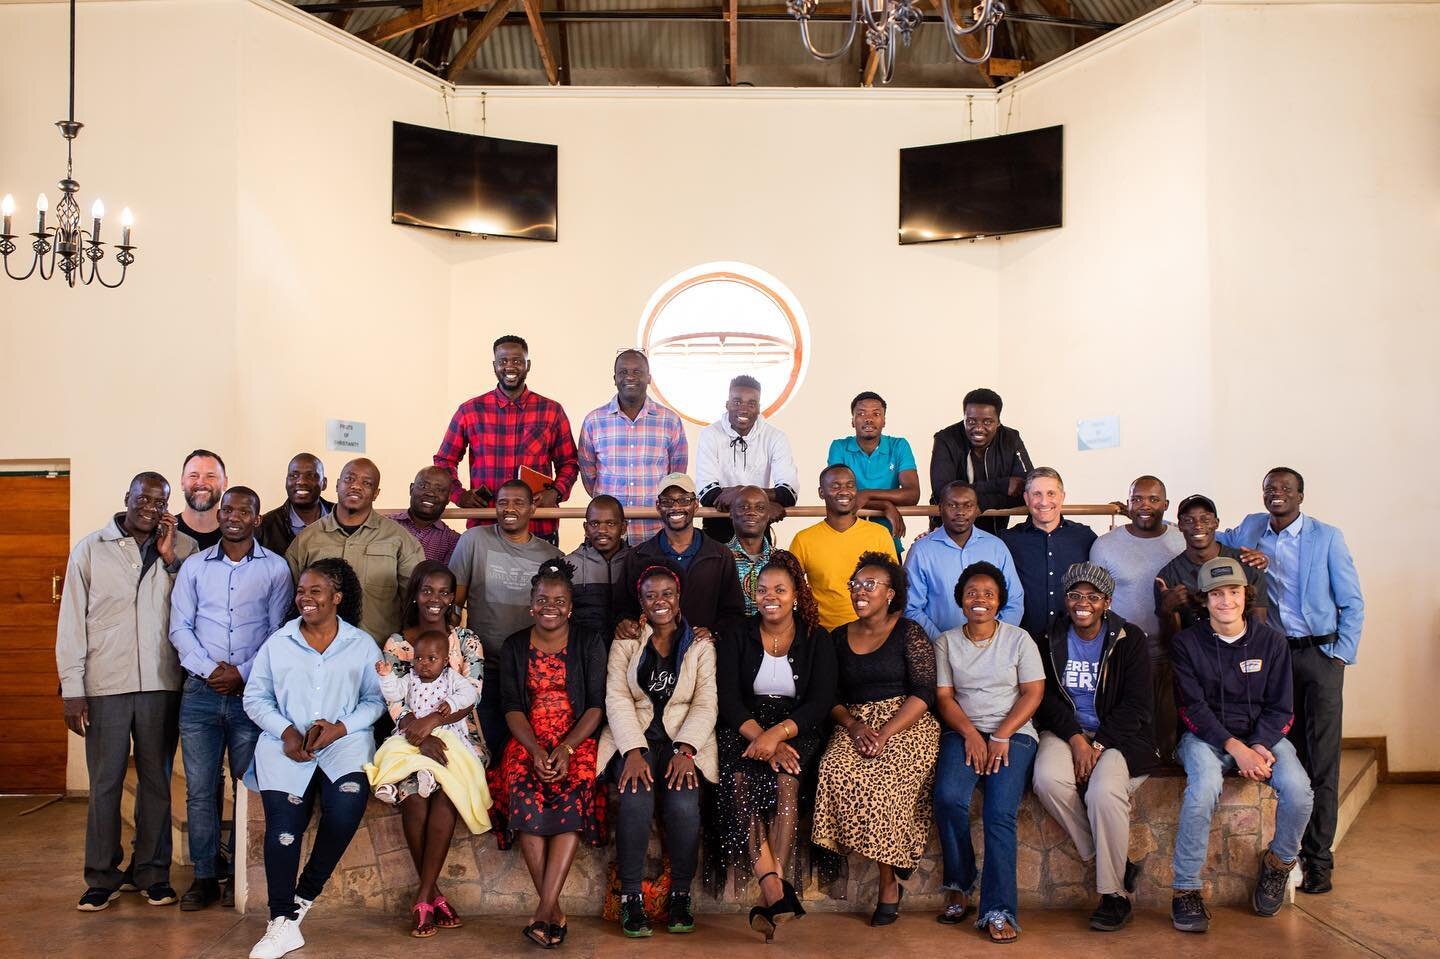 A few weeks ago we got the opportunity to attend an @arcsouthernafrica pastors meet-up here in ESwatini with a group of so many pastors we value and respect.
We visited a museum in an old stone church at the oldest hospital in ESwatini that tells the